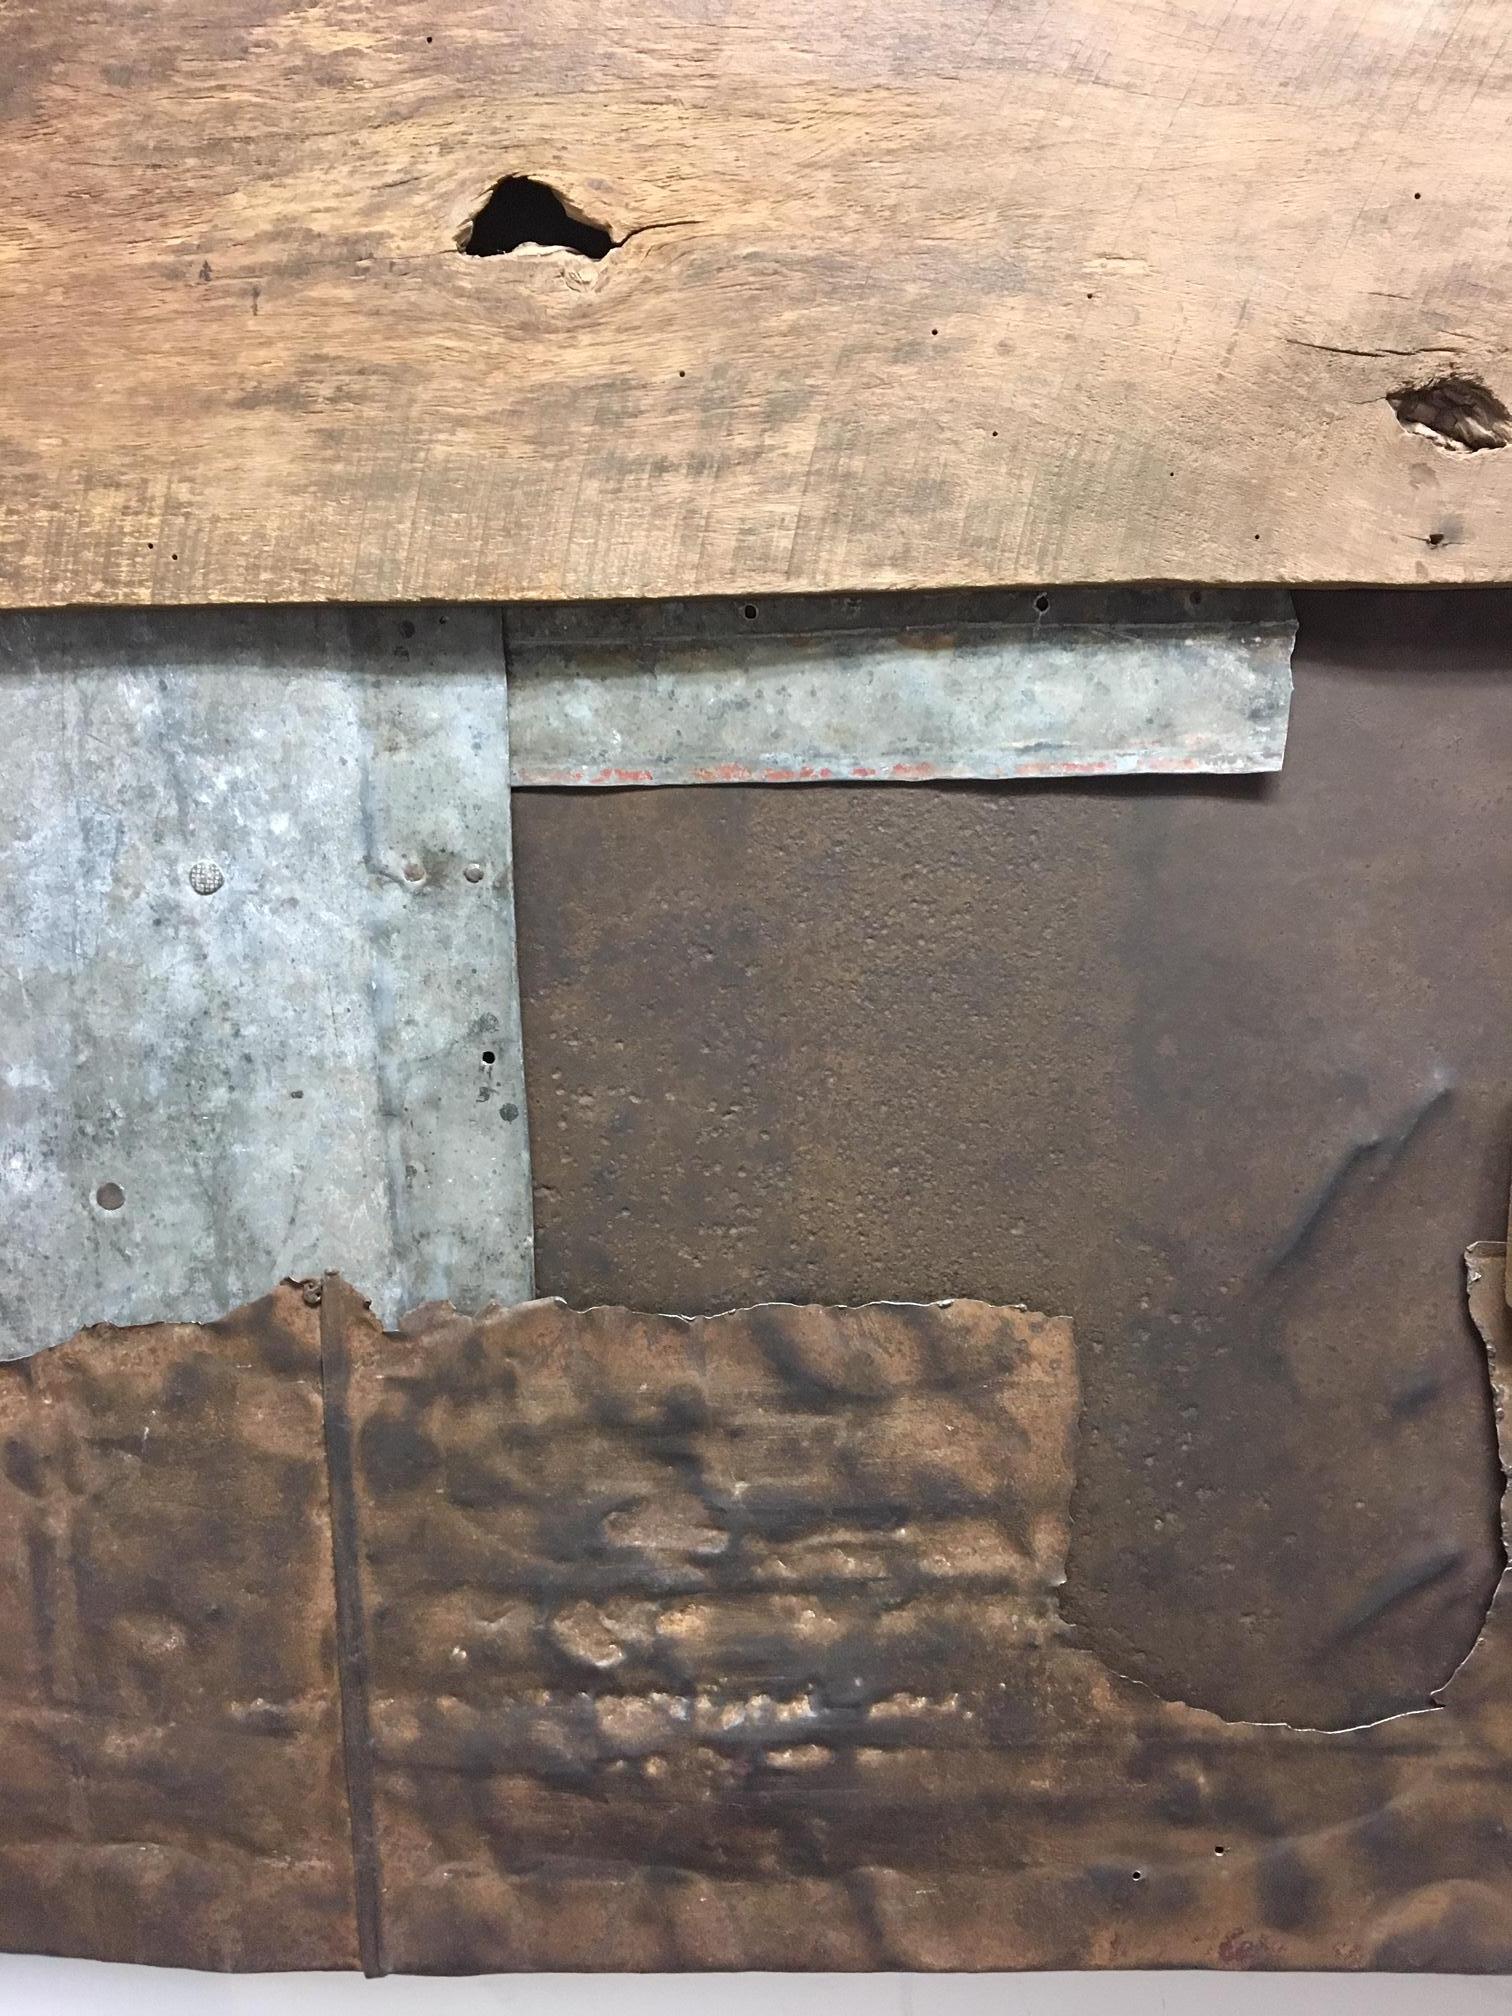 Landscape
sheet metal, wood, found objects
33 x 61in.

Artist statement:

I seldom use stock material, but prefer distressed and rusted steel that has been scarred, bent, and made imperfect. In this state, the material becomes quite beautiful. There